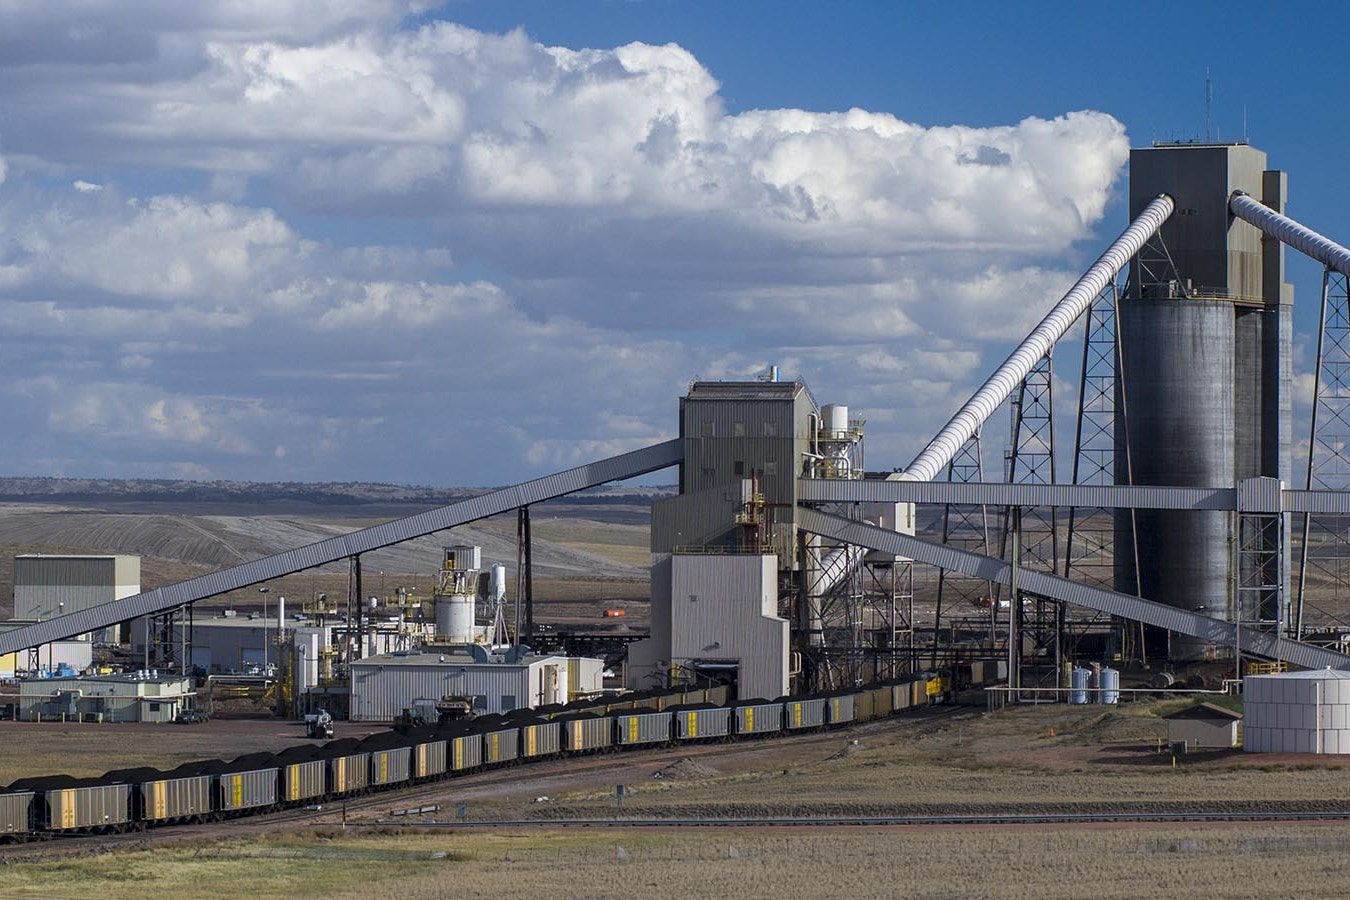 A coal train is loaded at a Wyoming coal mine in this file photo.